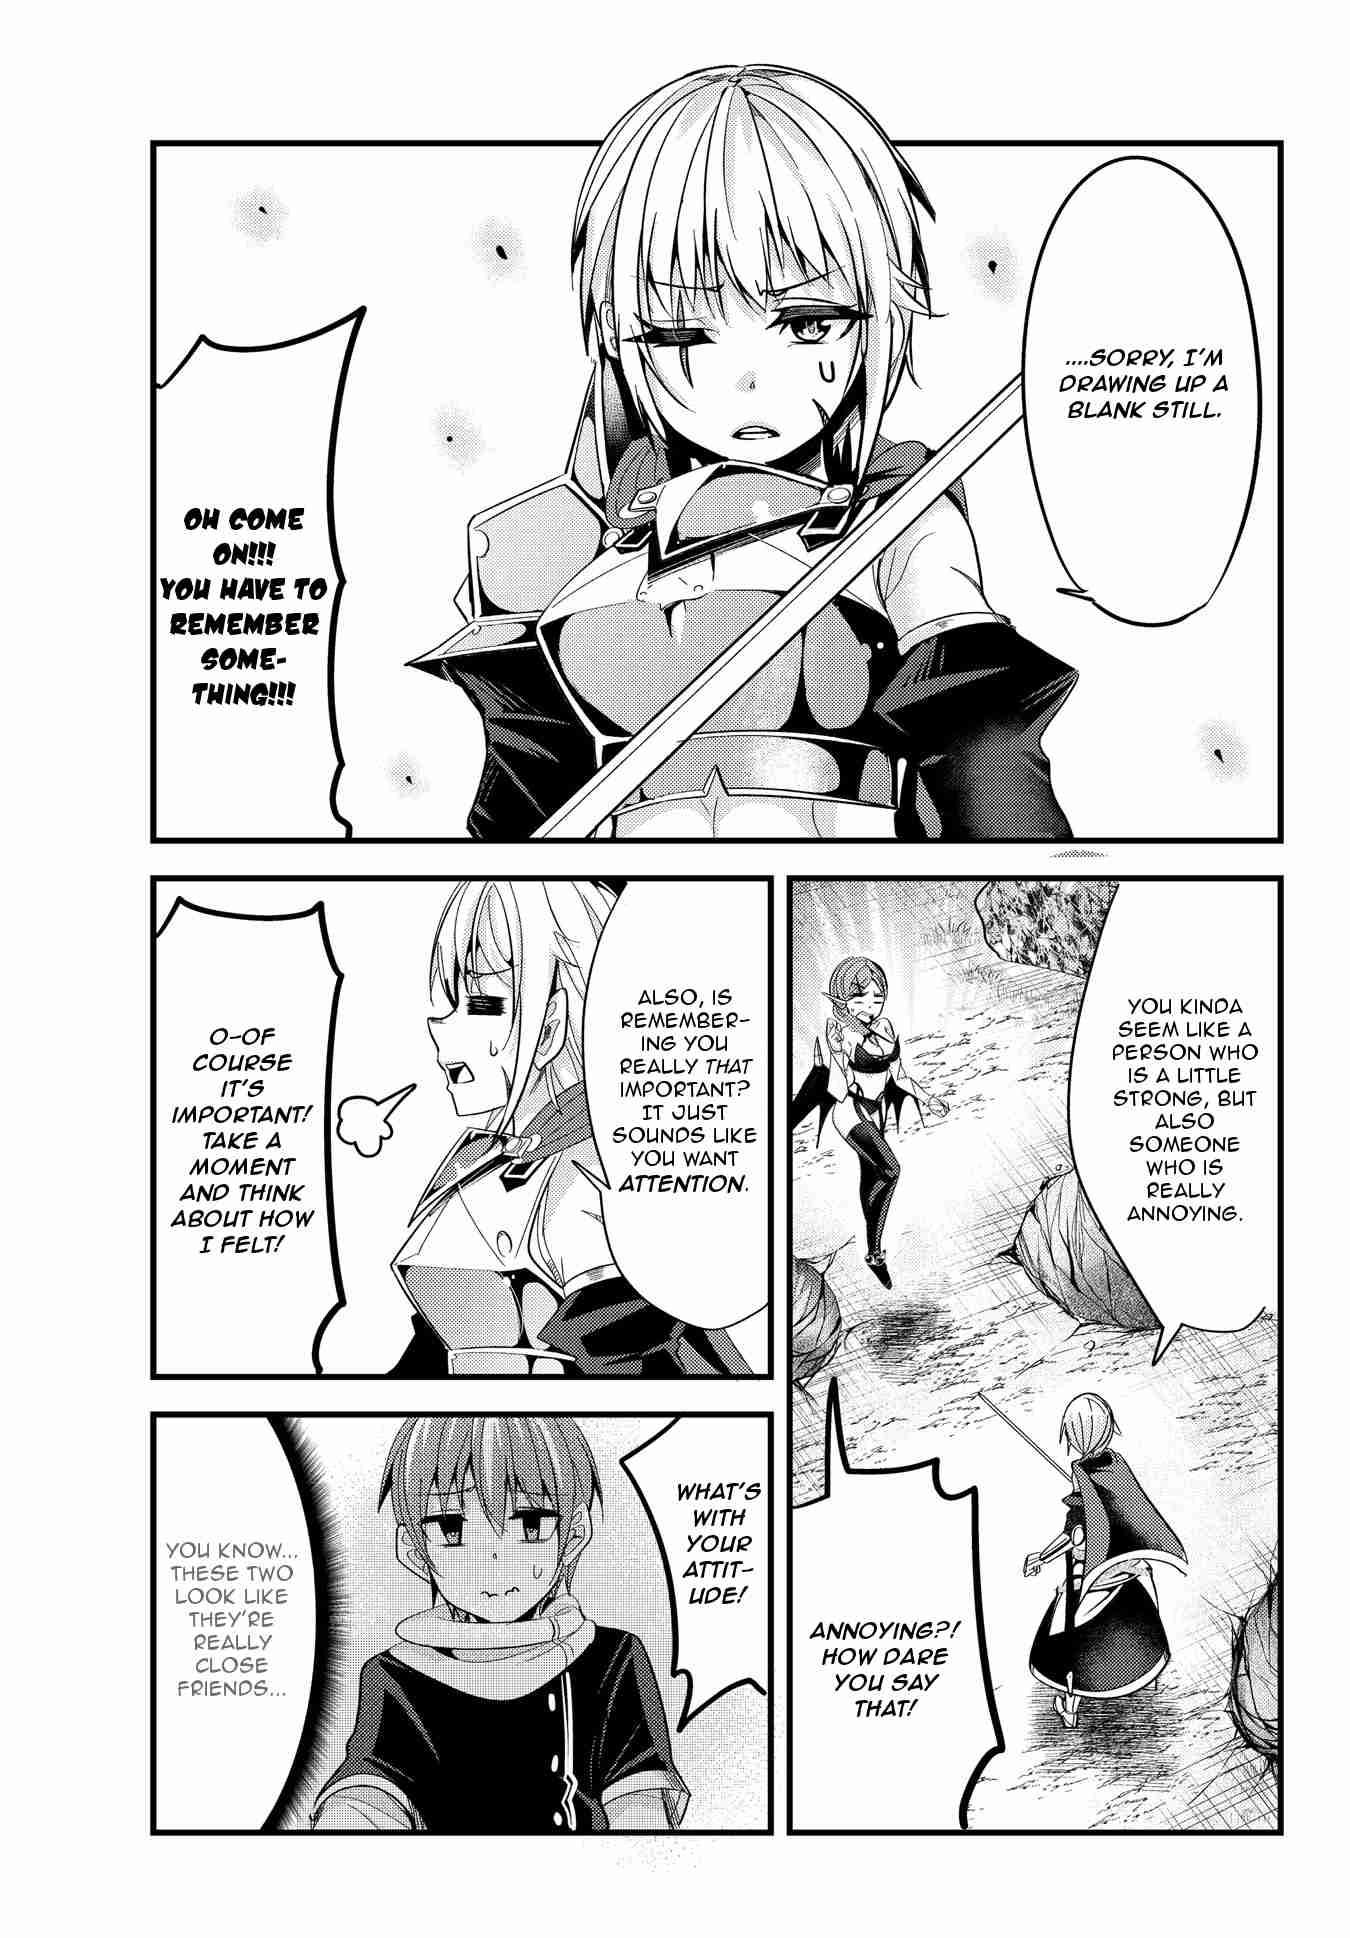 A Story About Treating a Female Knight Who Has Never Been Treated as a Woman Ch.49